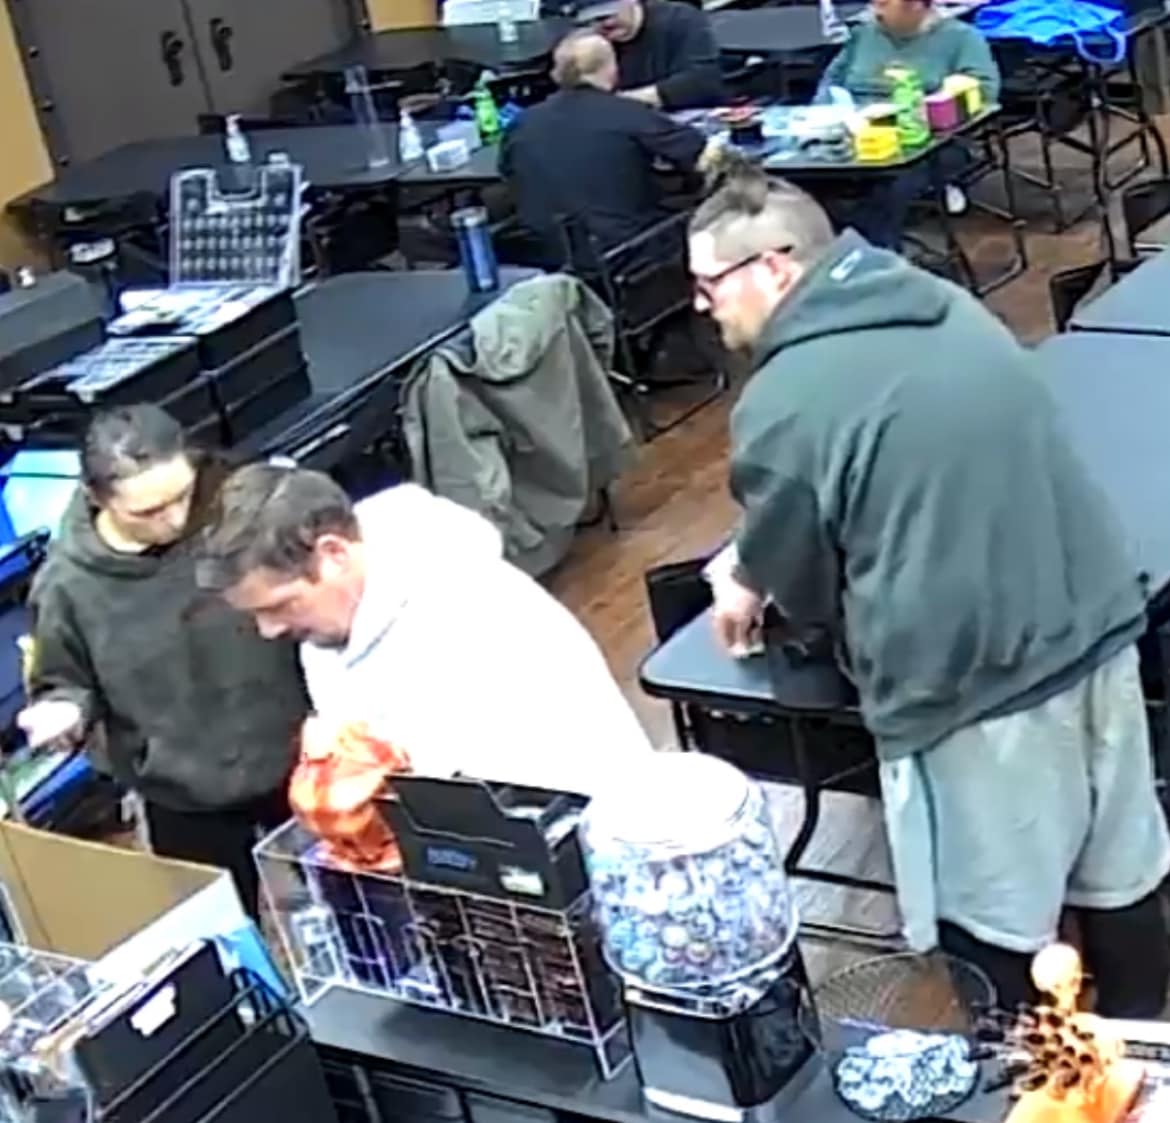 An image of the suspects allegedly robbing Reliquary Gaming in Chesteron, Indiana.